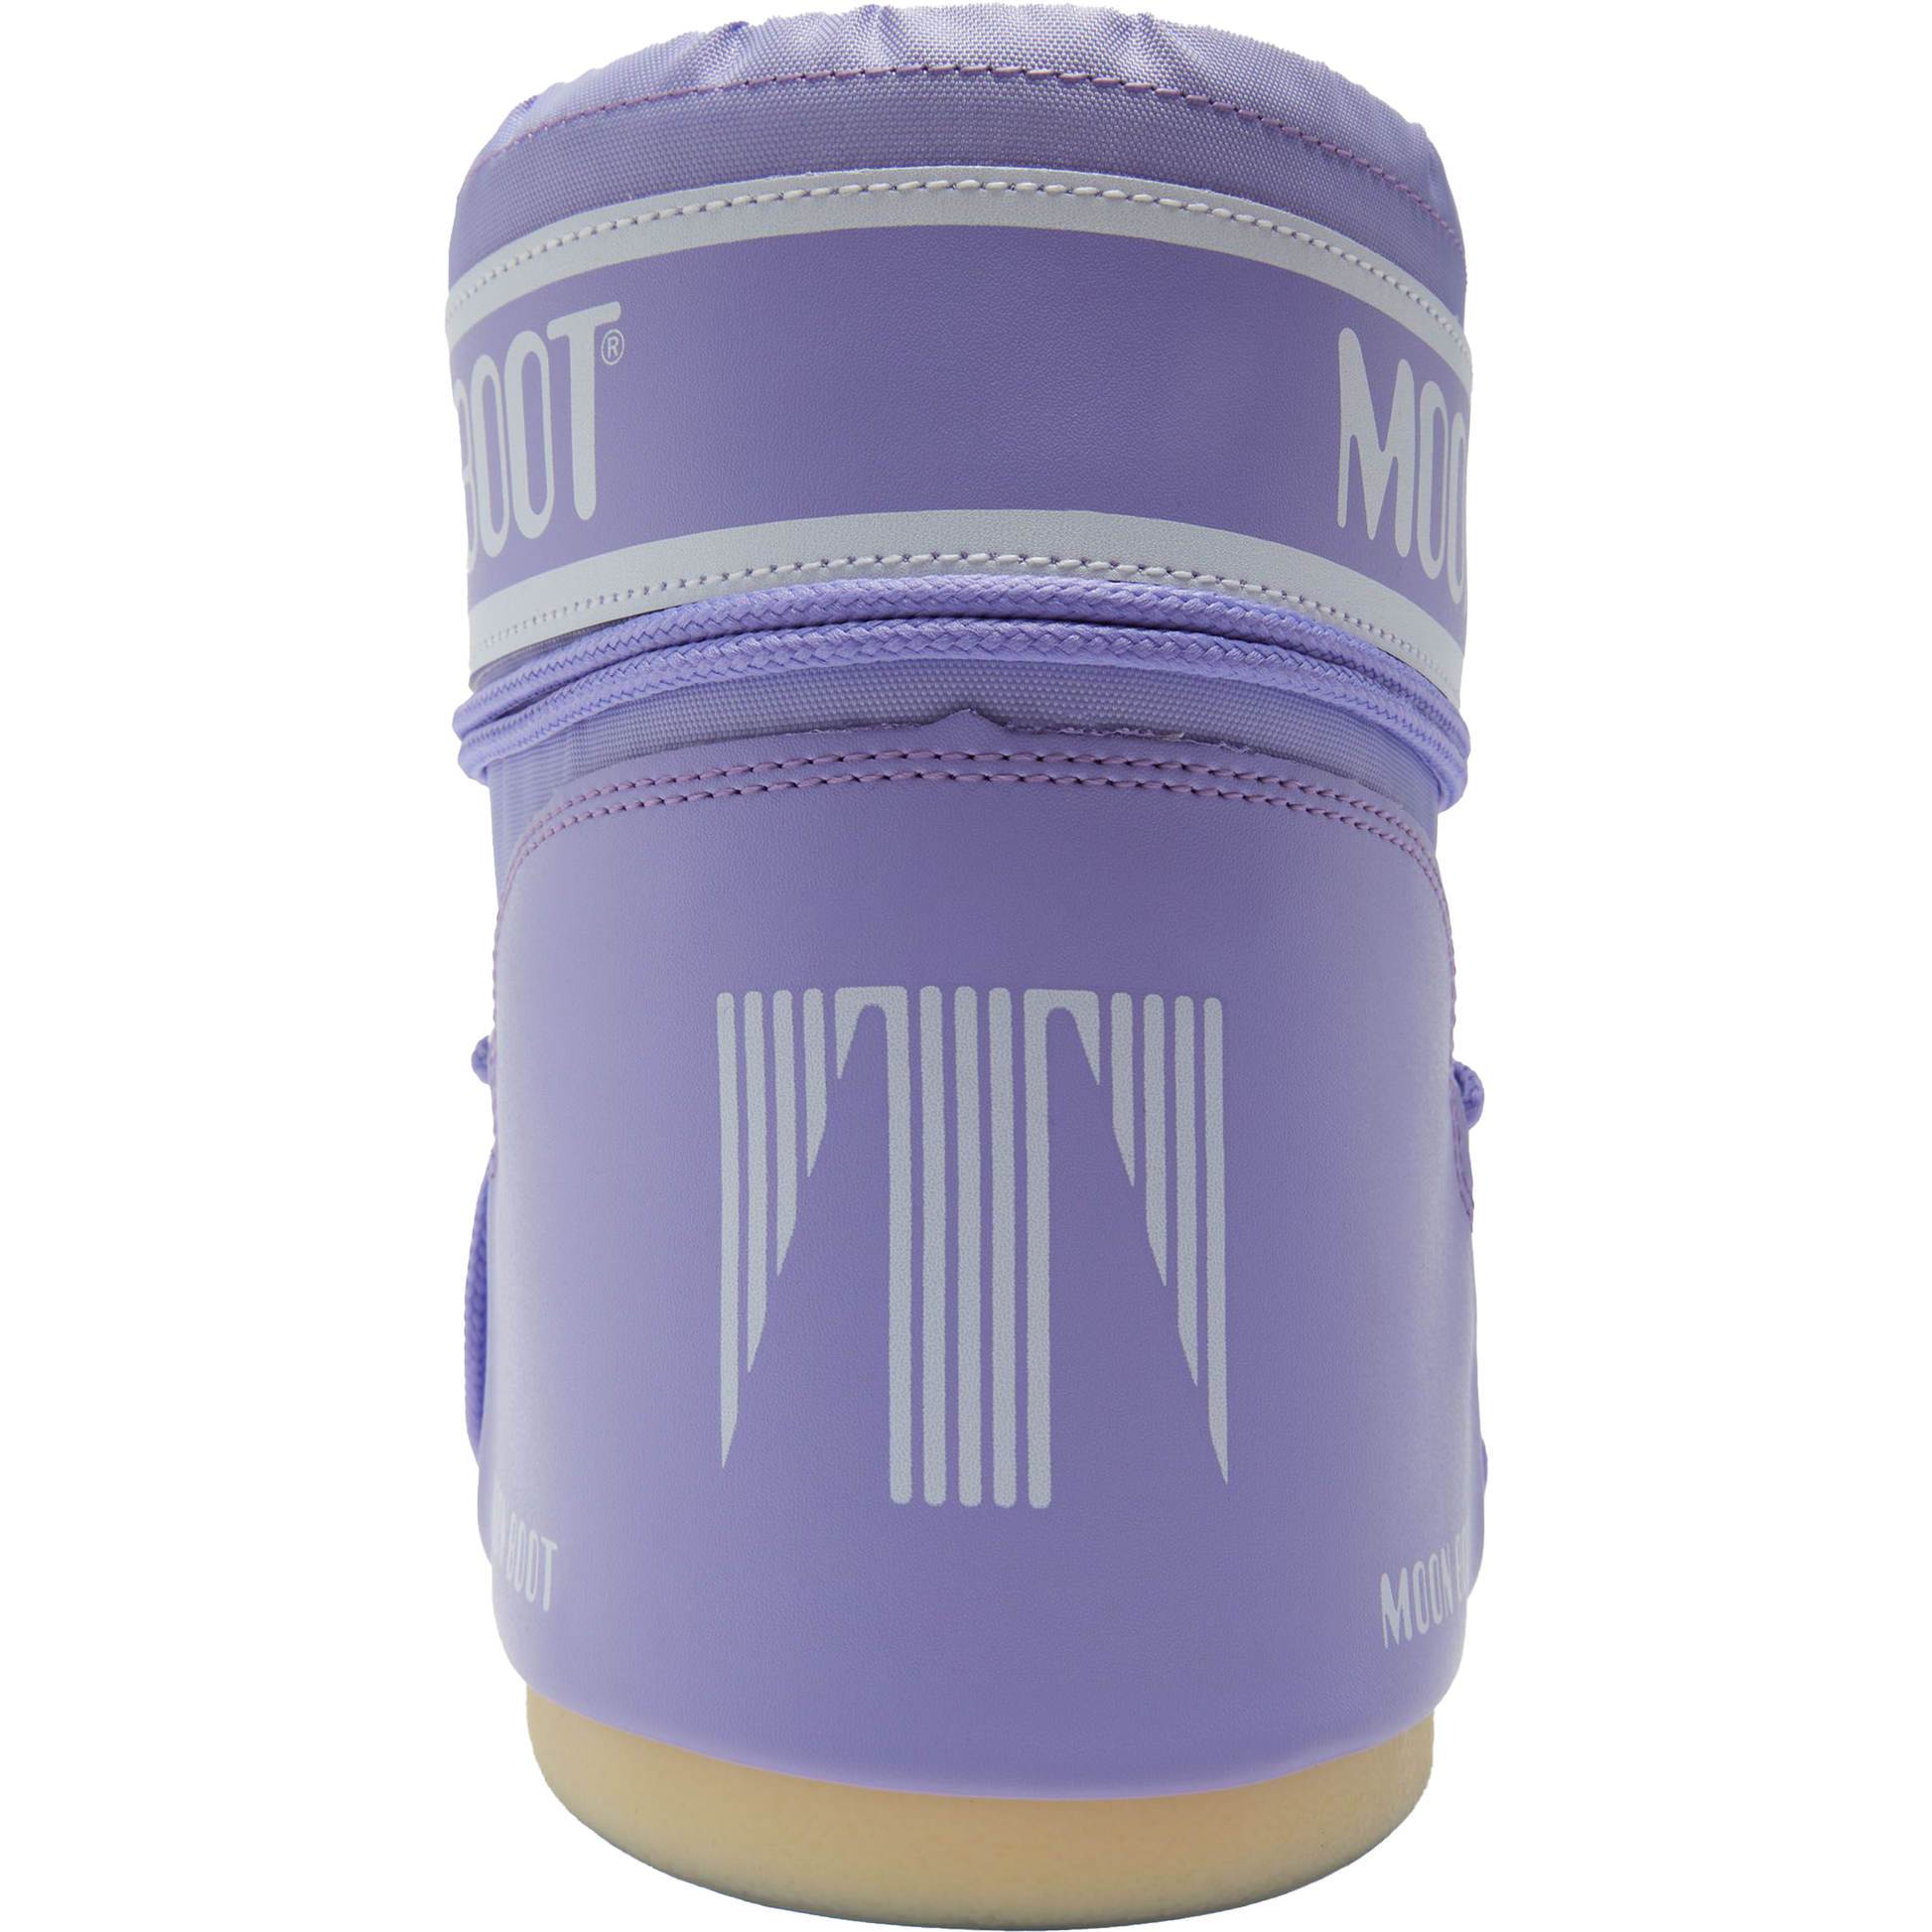 Moon Boot Consignment W Snow Boots Icon Low Nylon, Lilac